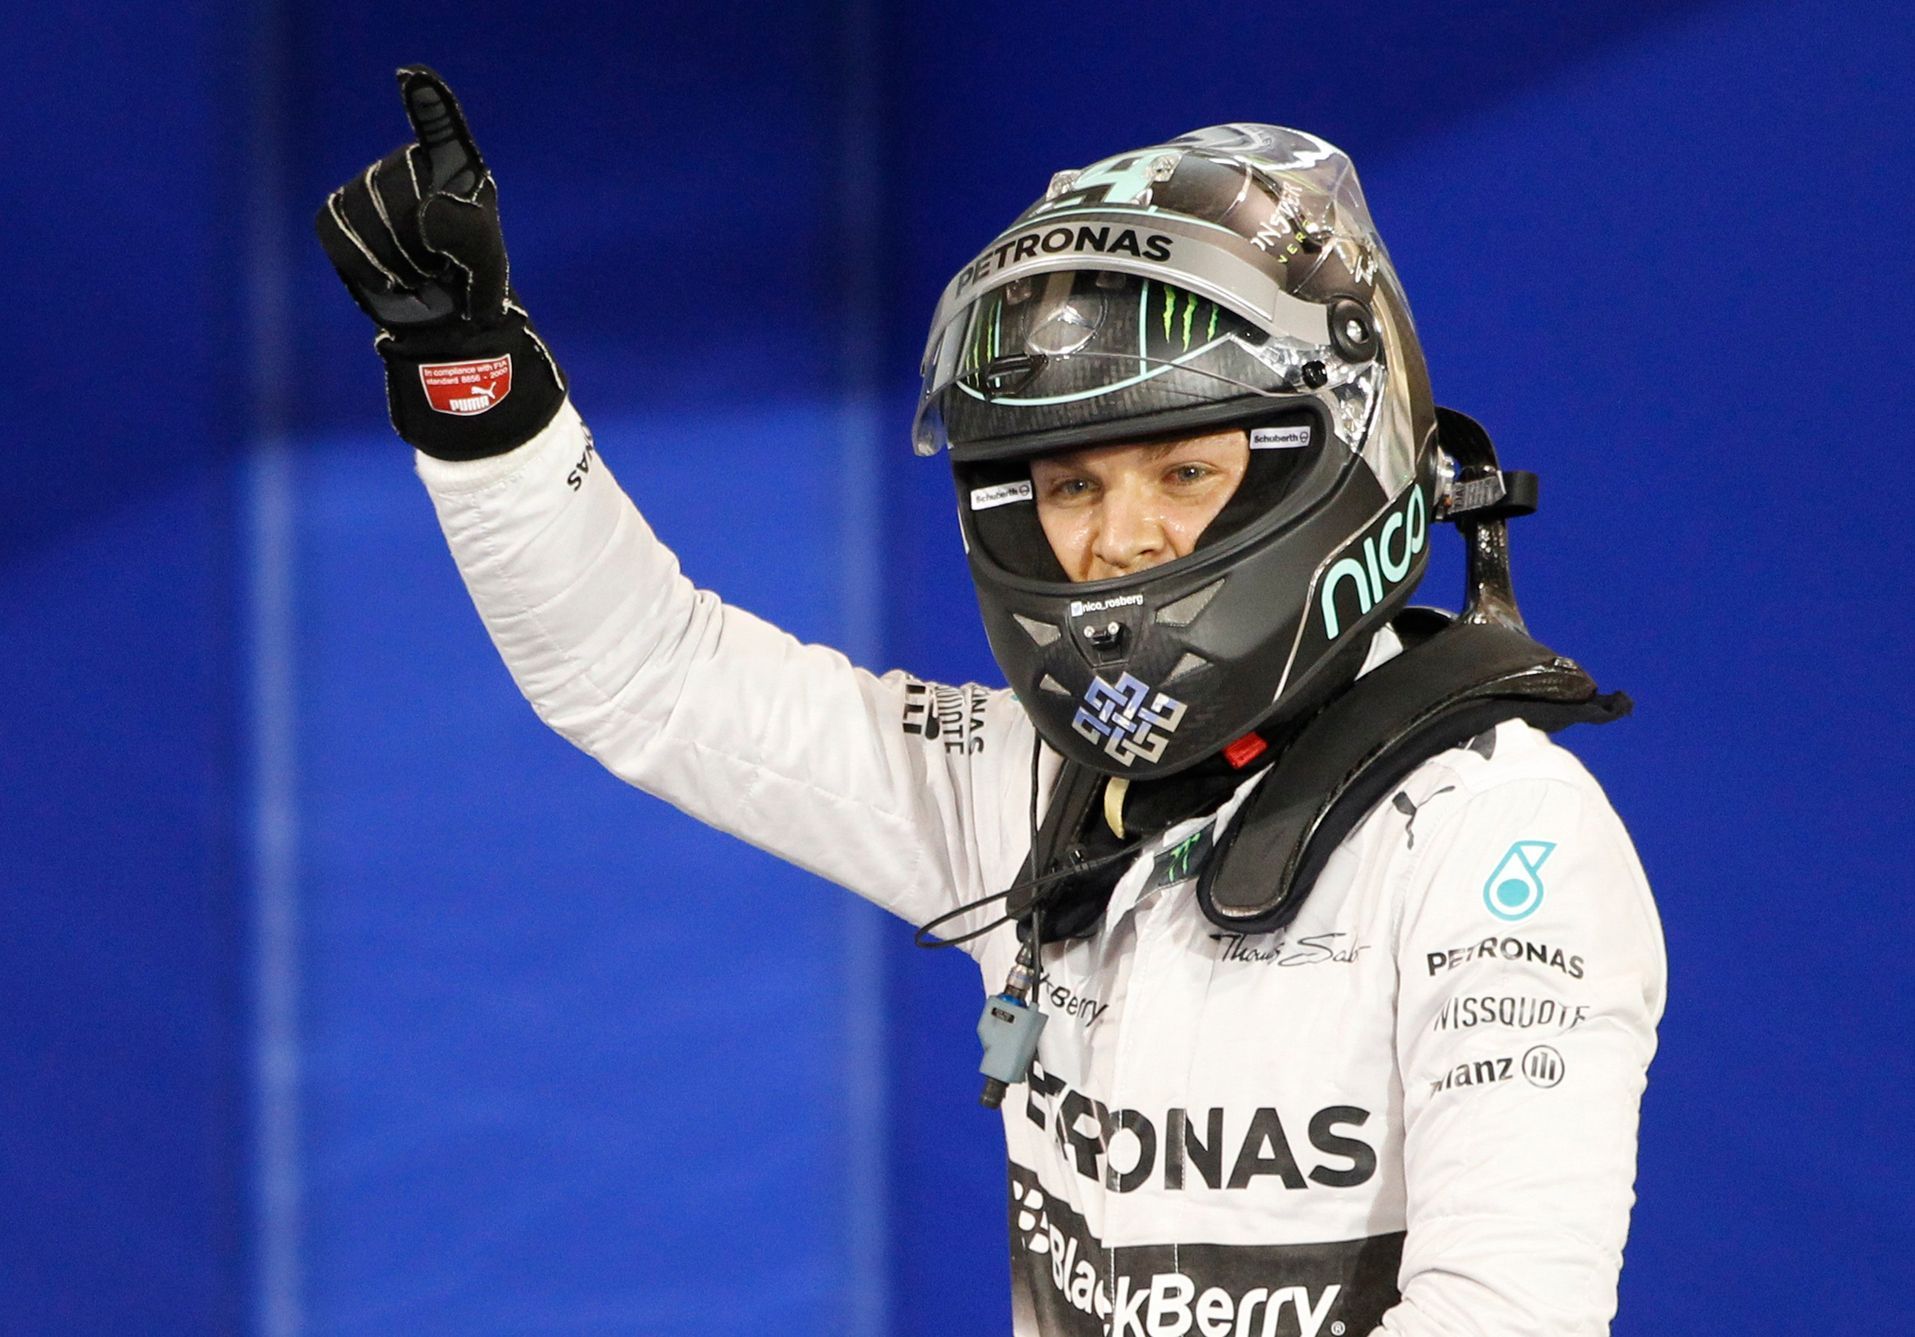 Mercedes Formula One driver Nico Rosberg of Germany celebrates after taking pole position at the qualifying session of the Bahrain F1 Grand Prix at the Bahrain International Circuit (BIC) in Sakhir